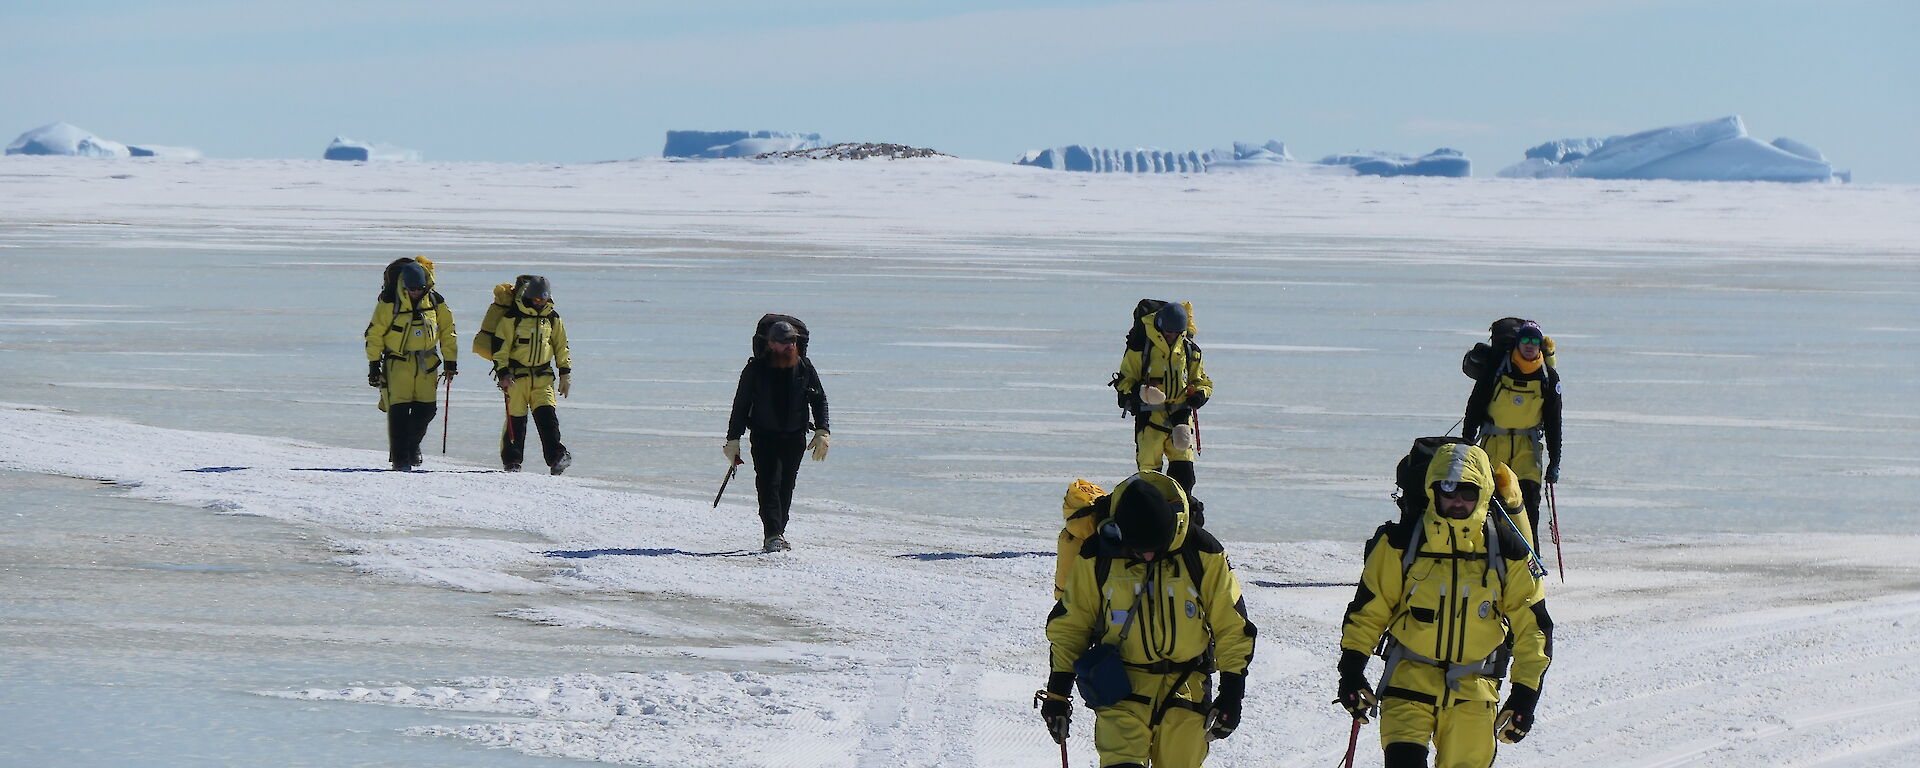 A group of expeditioners walking across sea ice